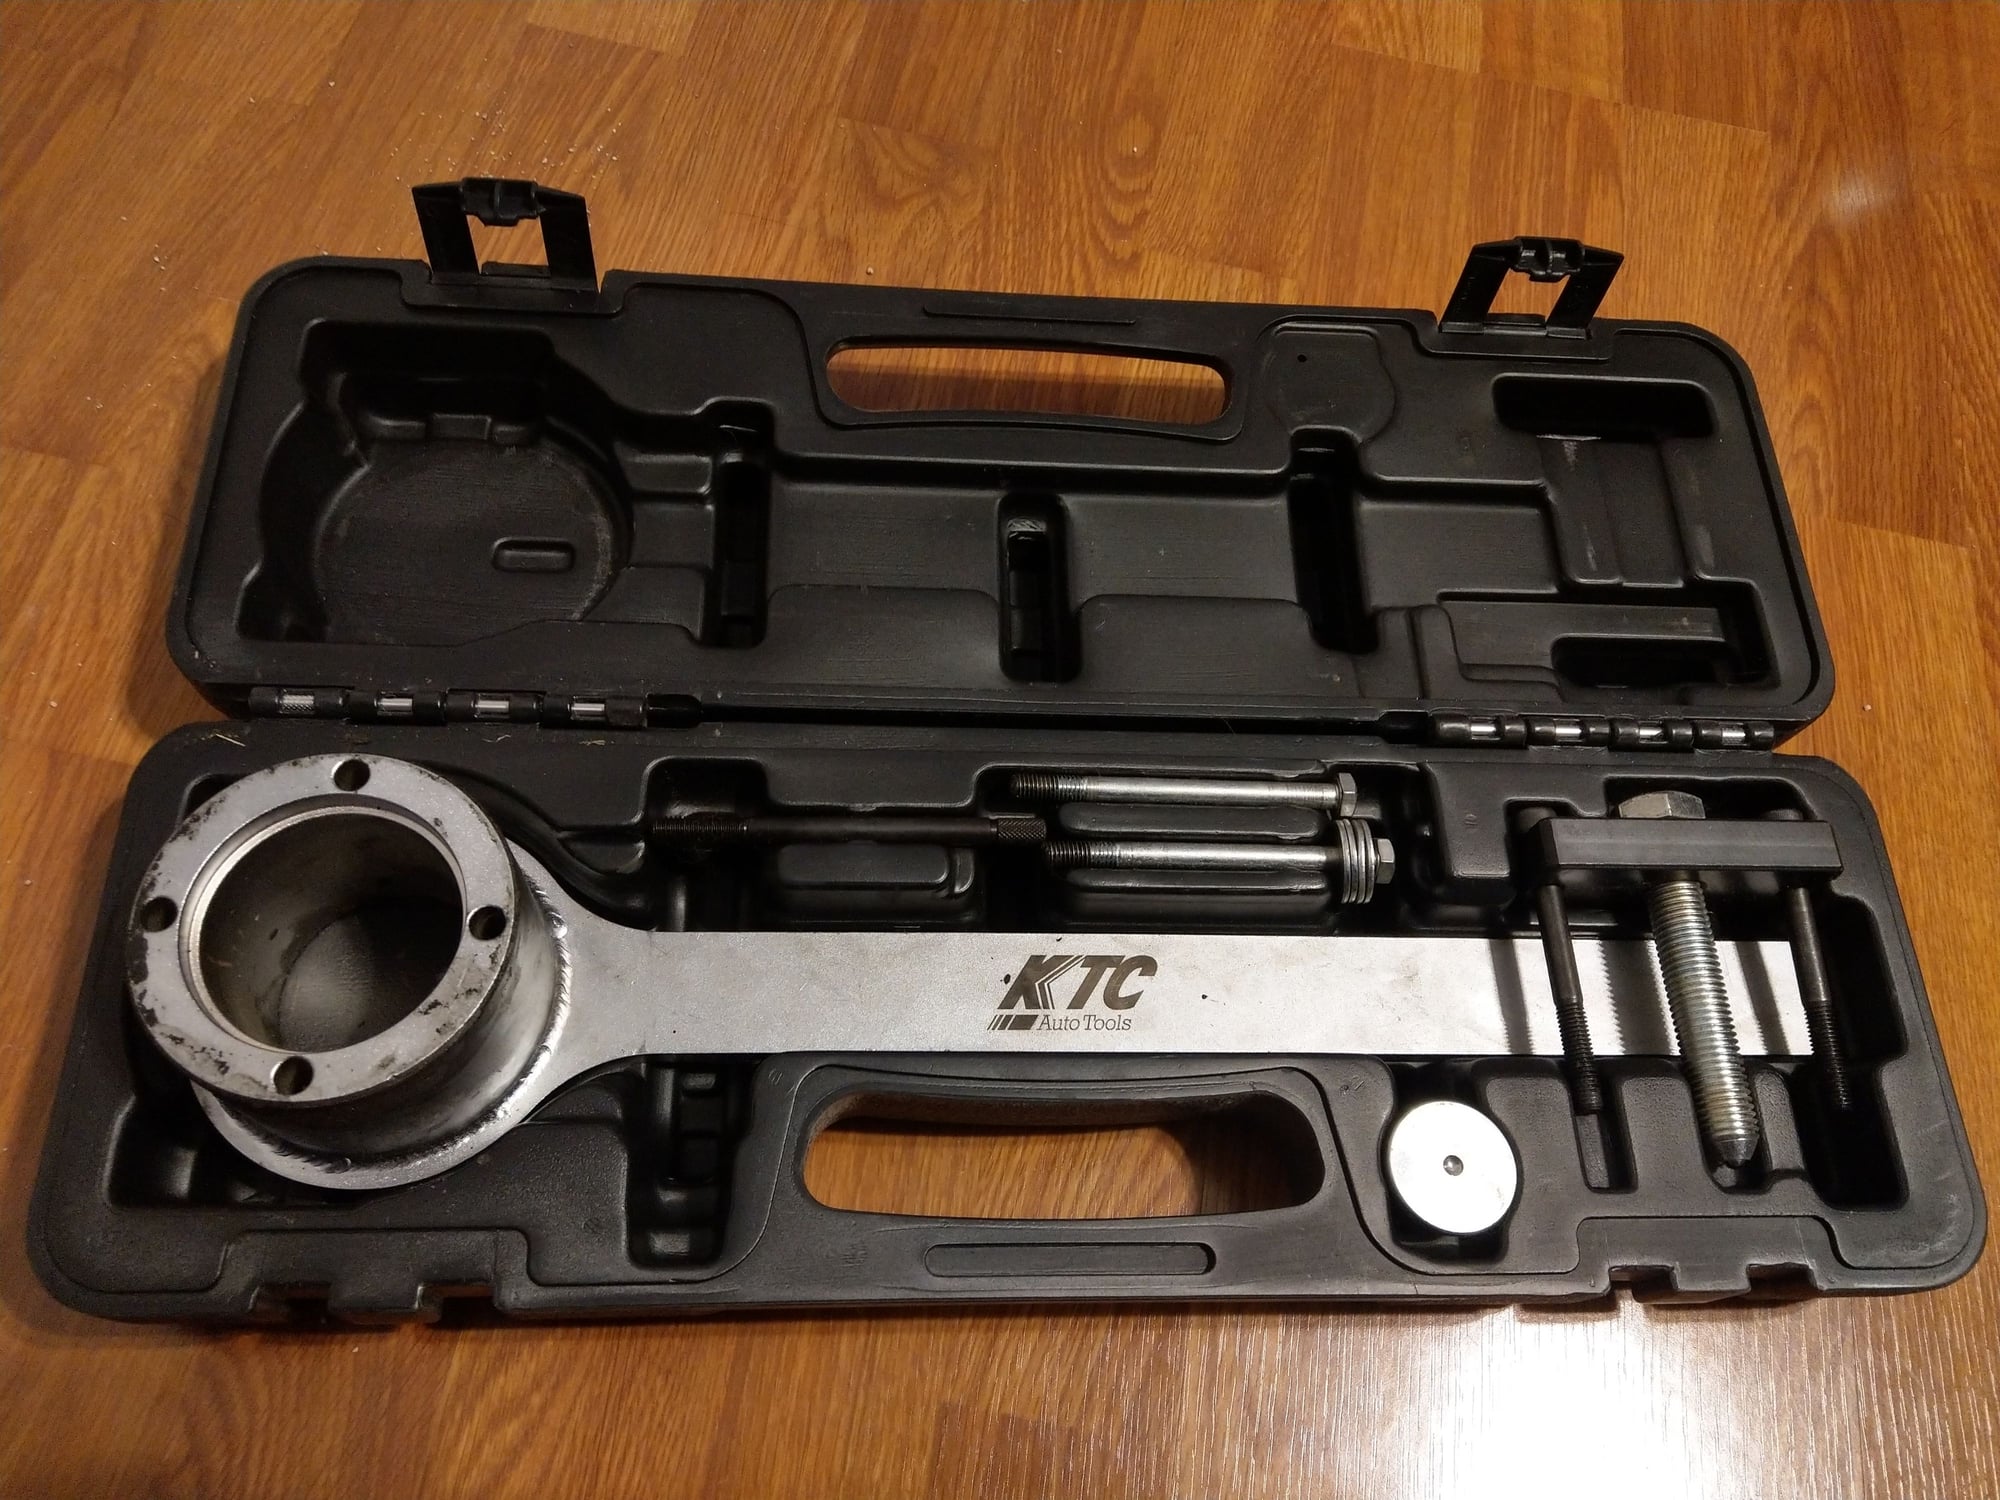 Miscellaneous - Crank pulley removal/installer tool set - Used - Lawrence, KS 66049, United States